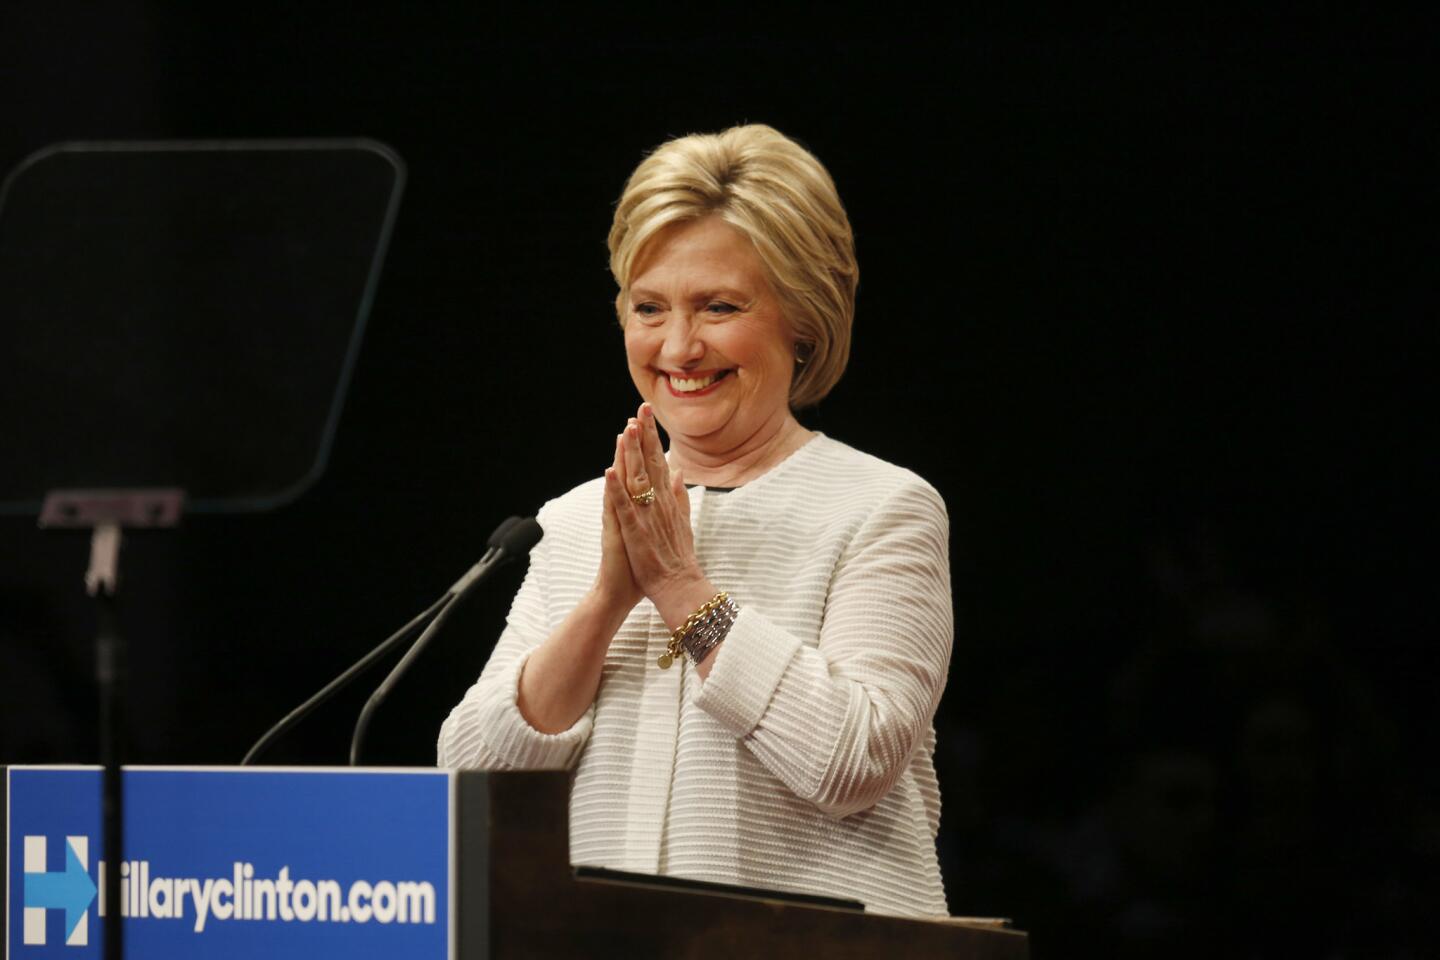 Hillary Clinton thanks her supporters at a rally in Brooklyn, N.Y.